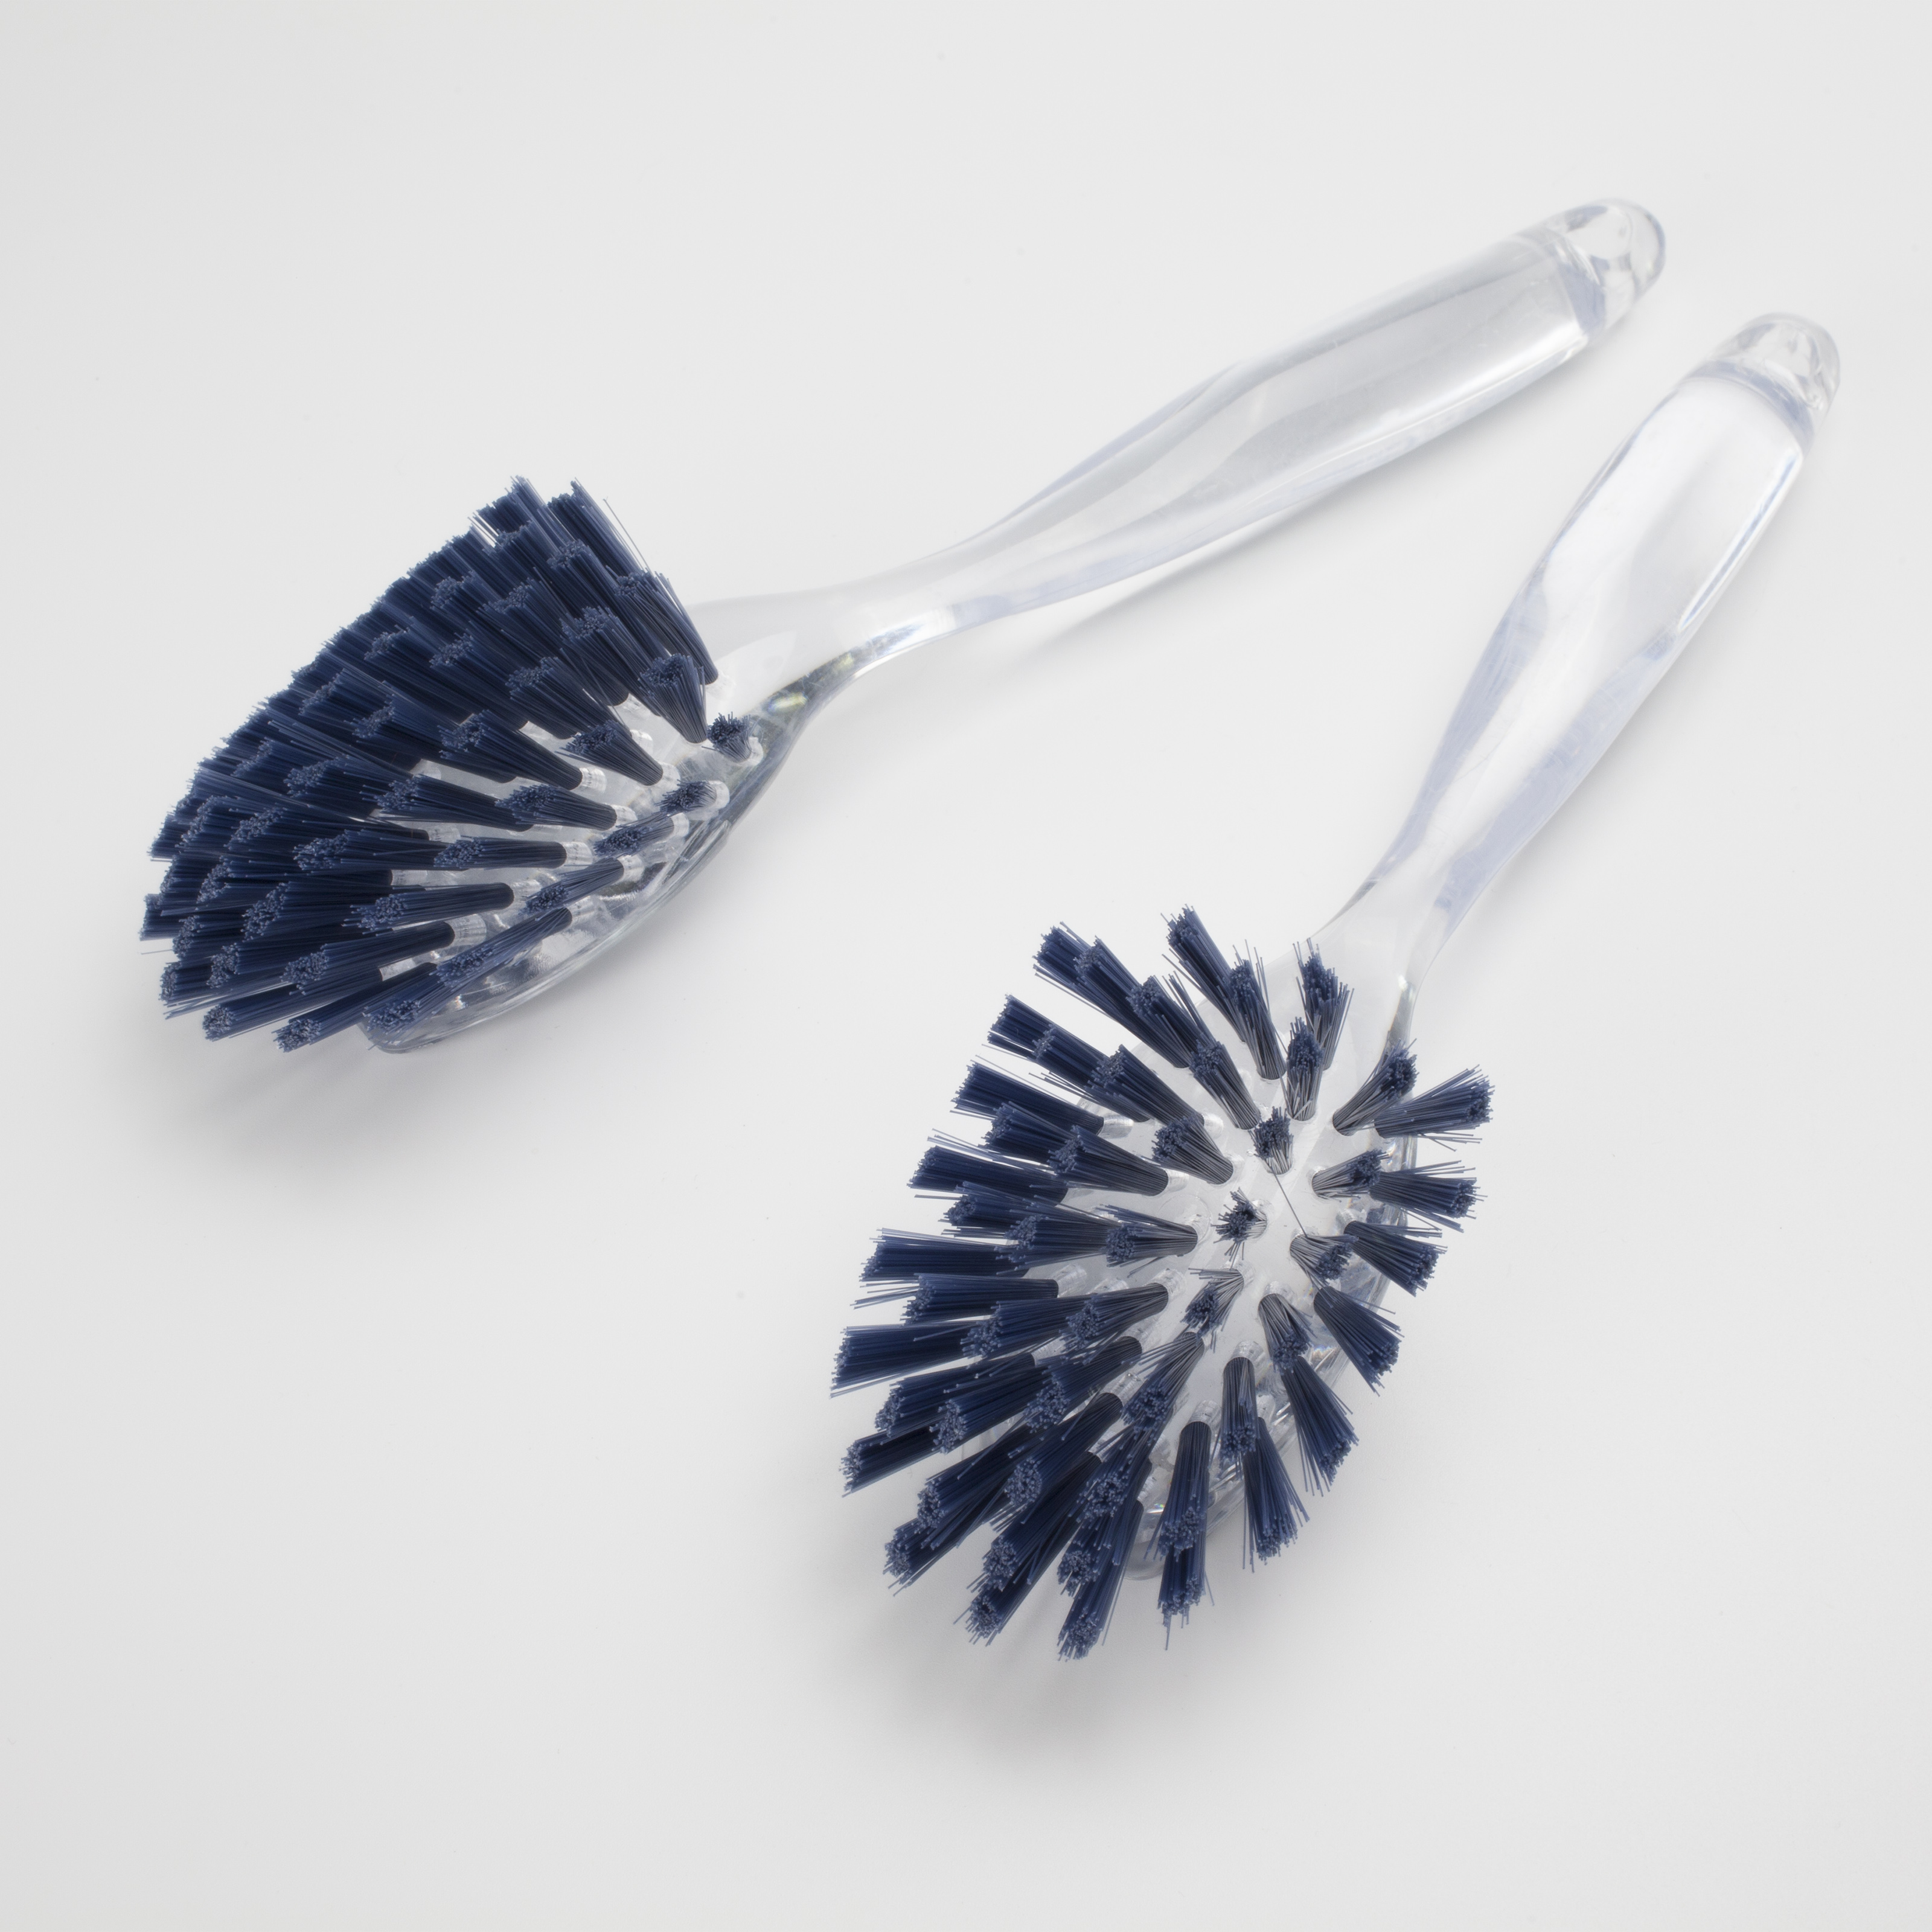 New Transparent Cleaning Brush & Kitchen Cleaning Brush